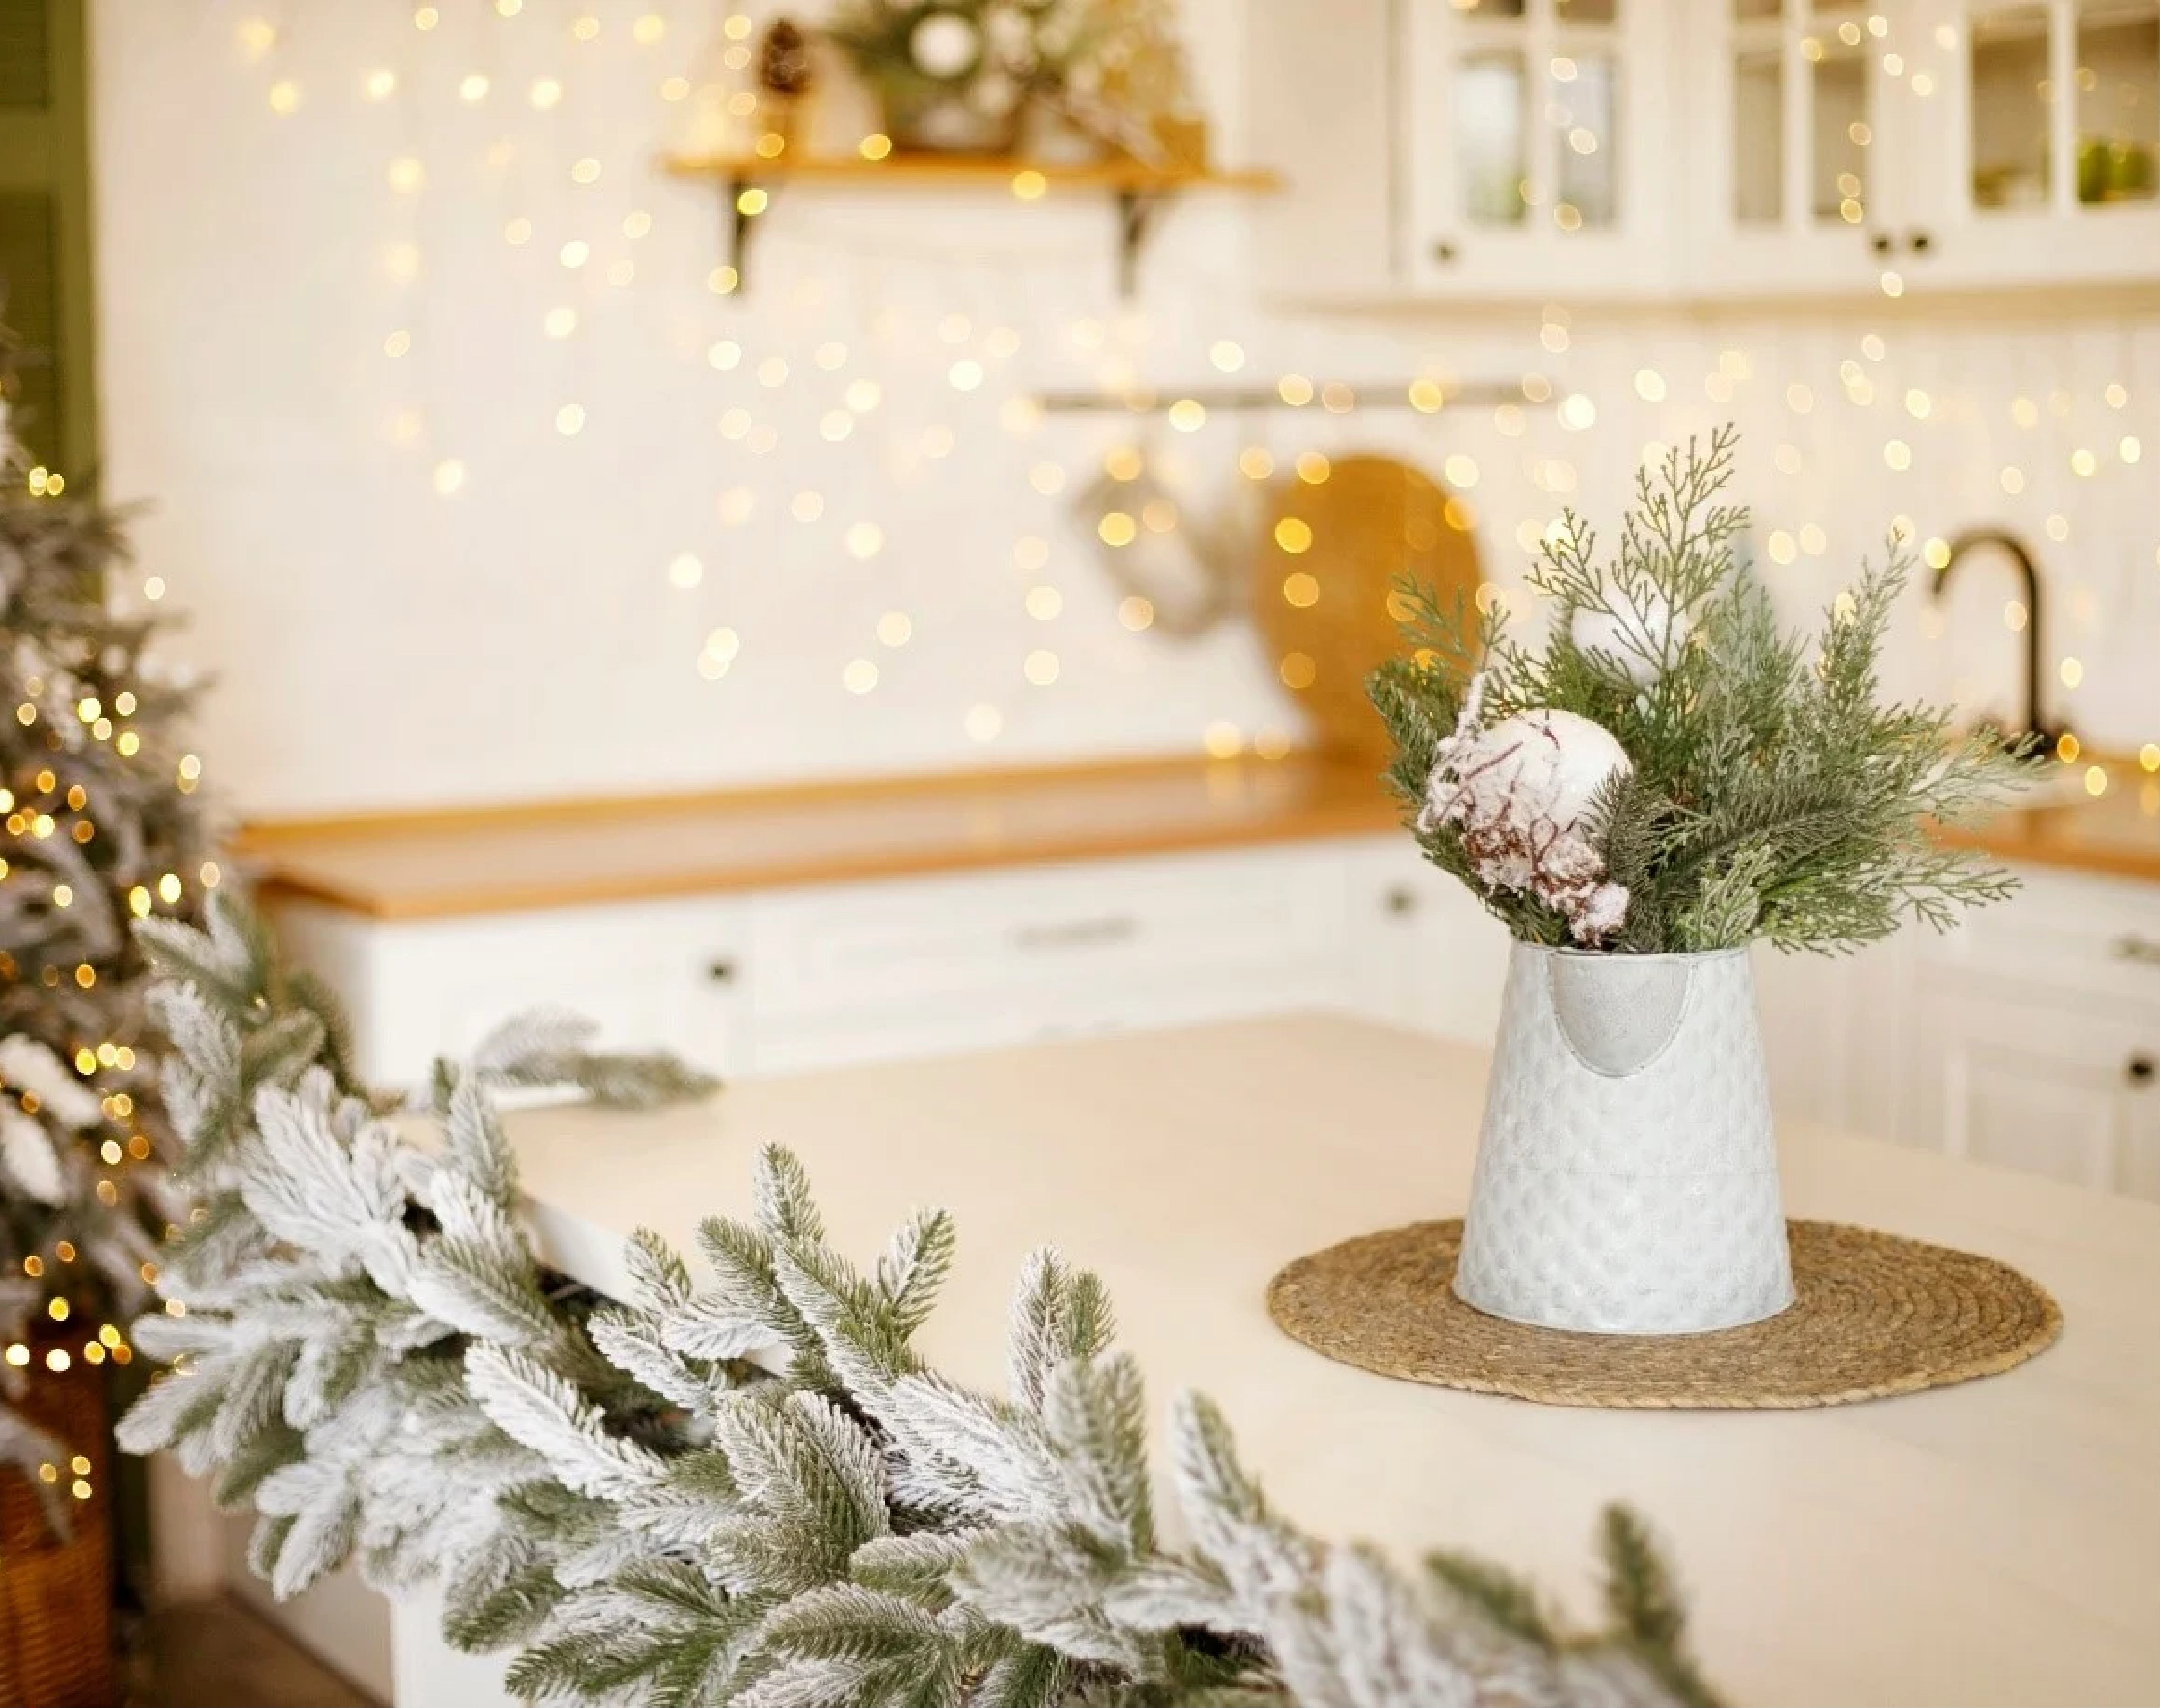 Your one stop guide to a festive kitchen this Christmas!